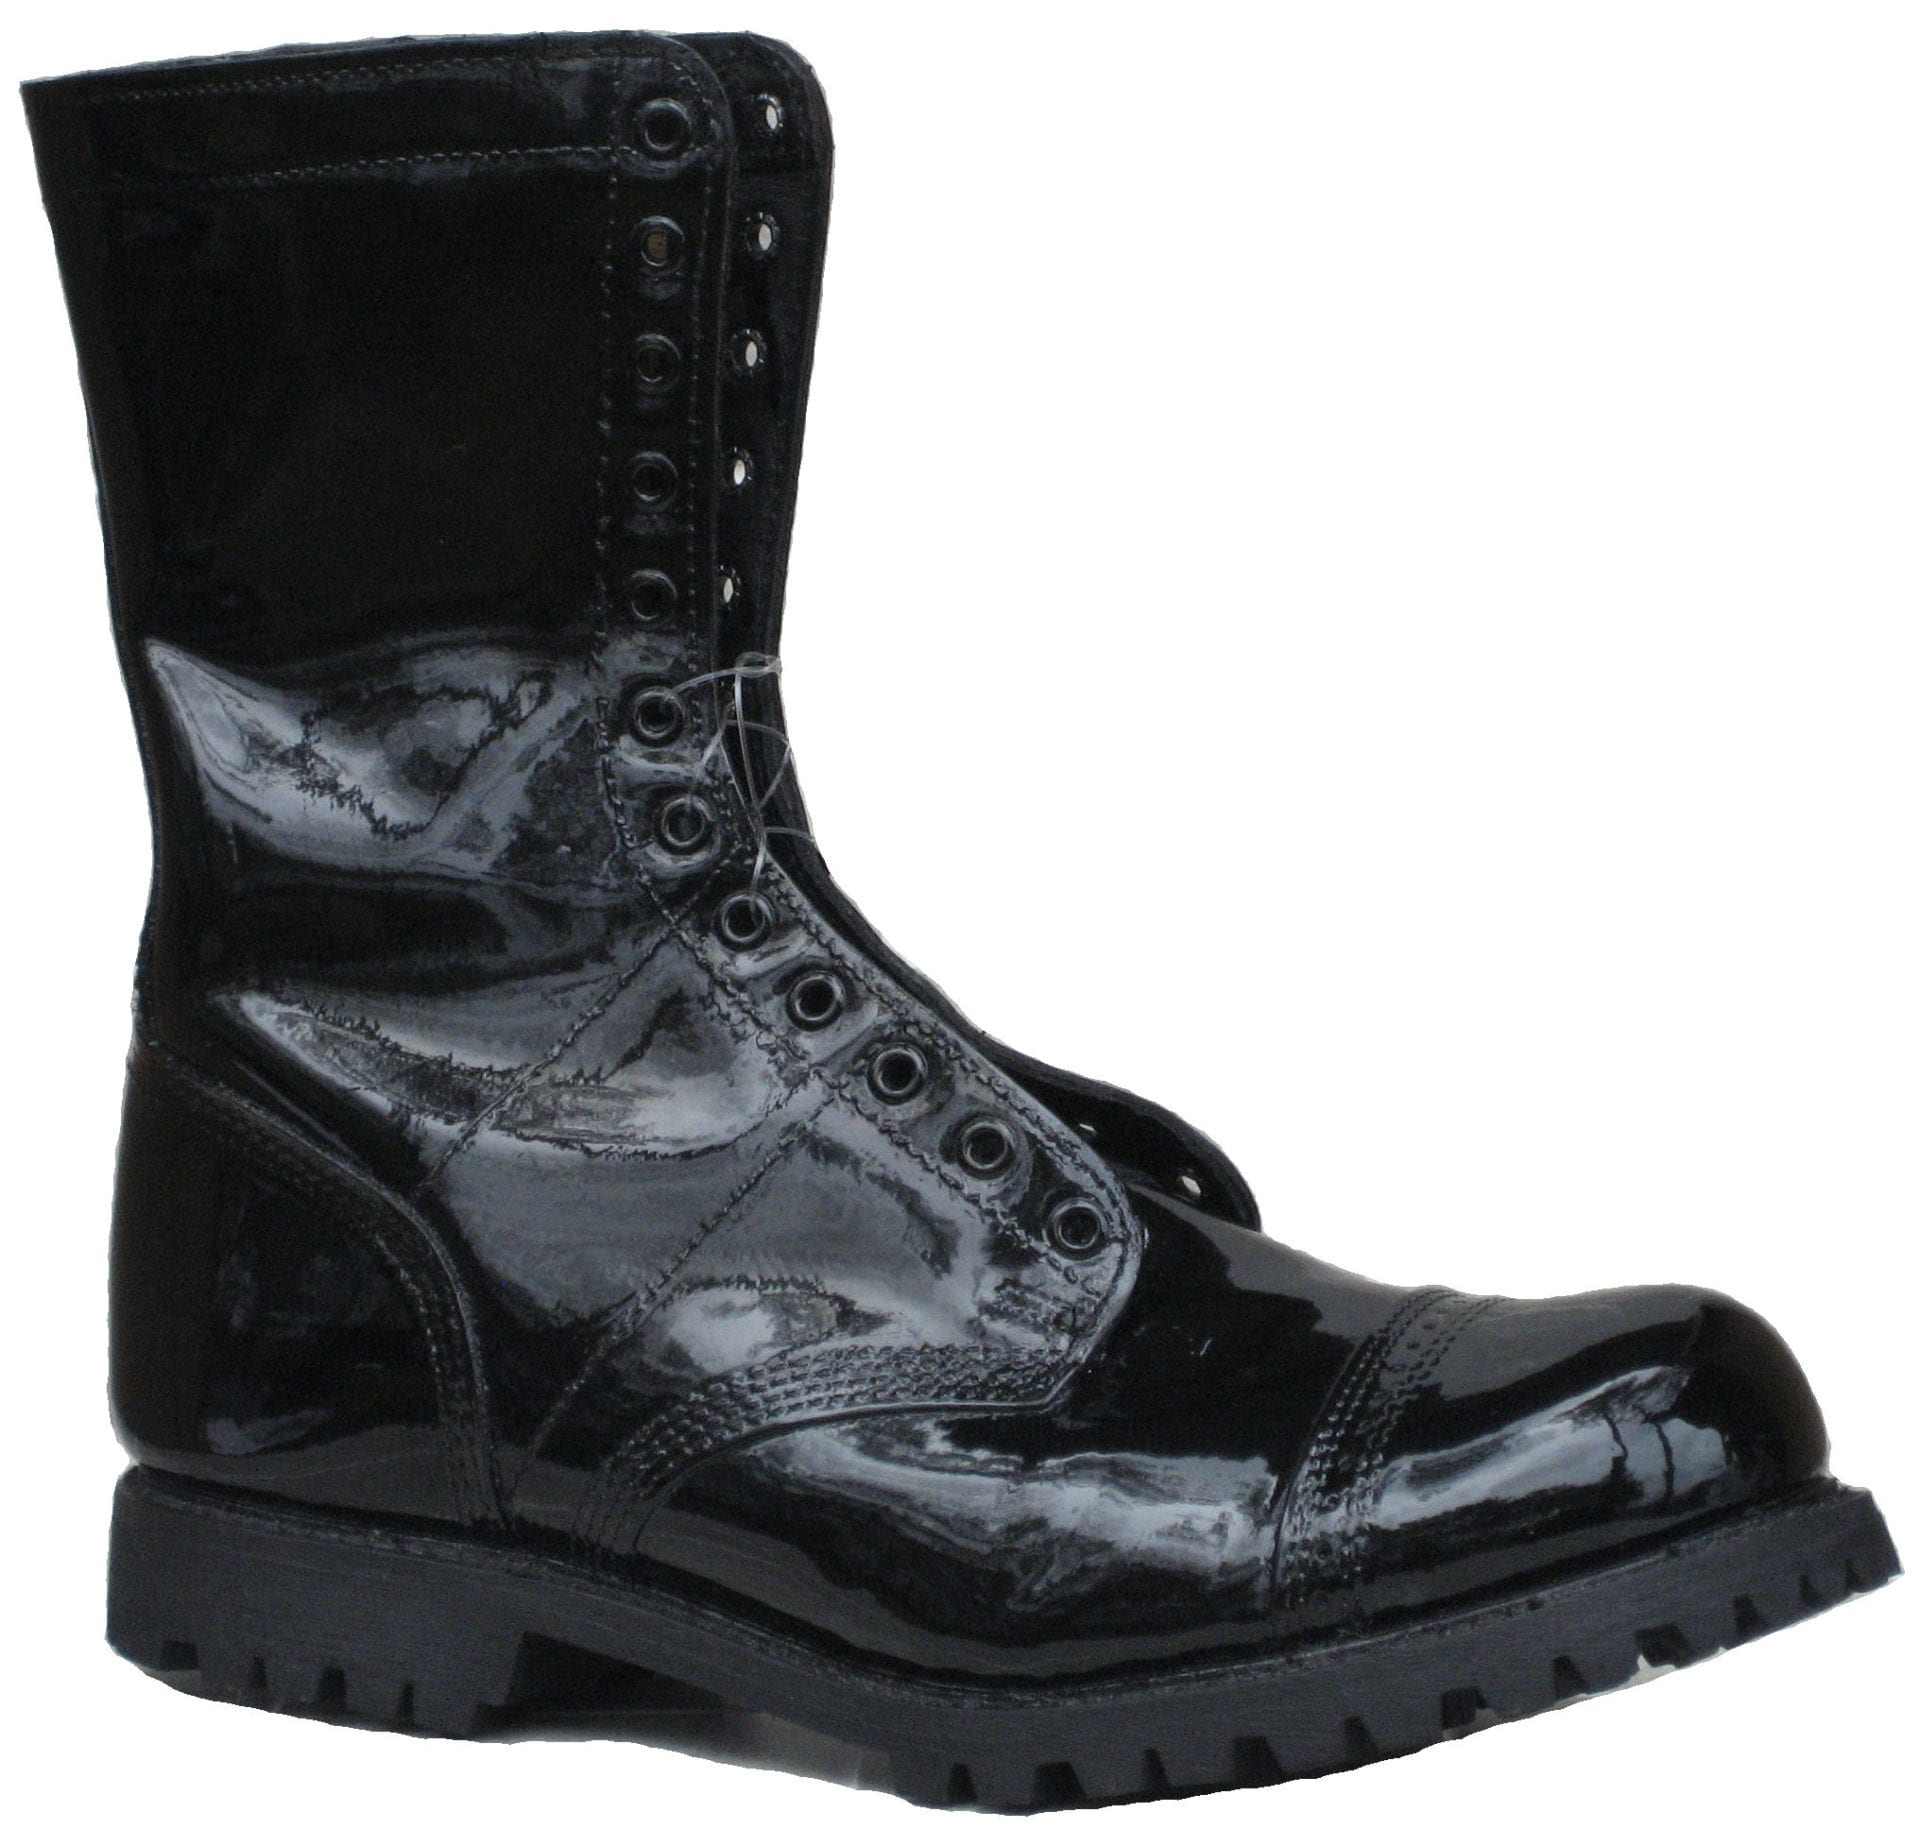 Sale on 15000+ Leather Boots offers and gifts